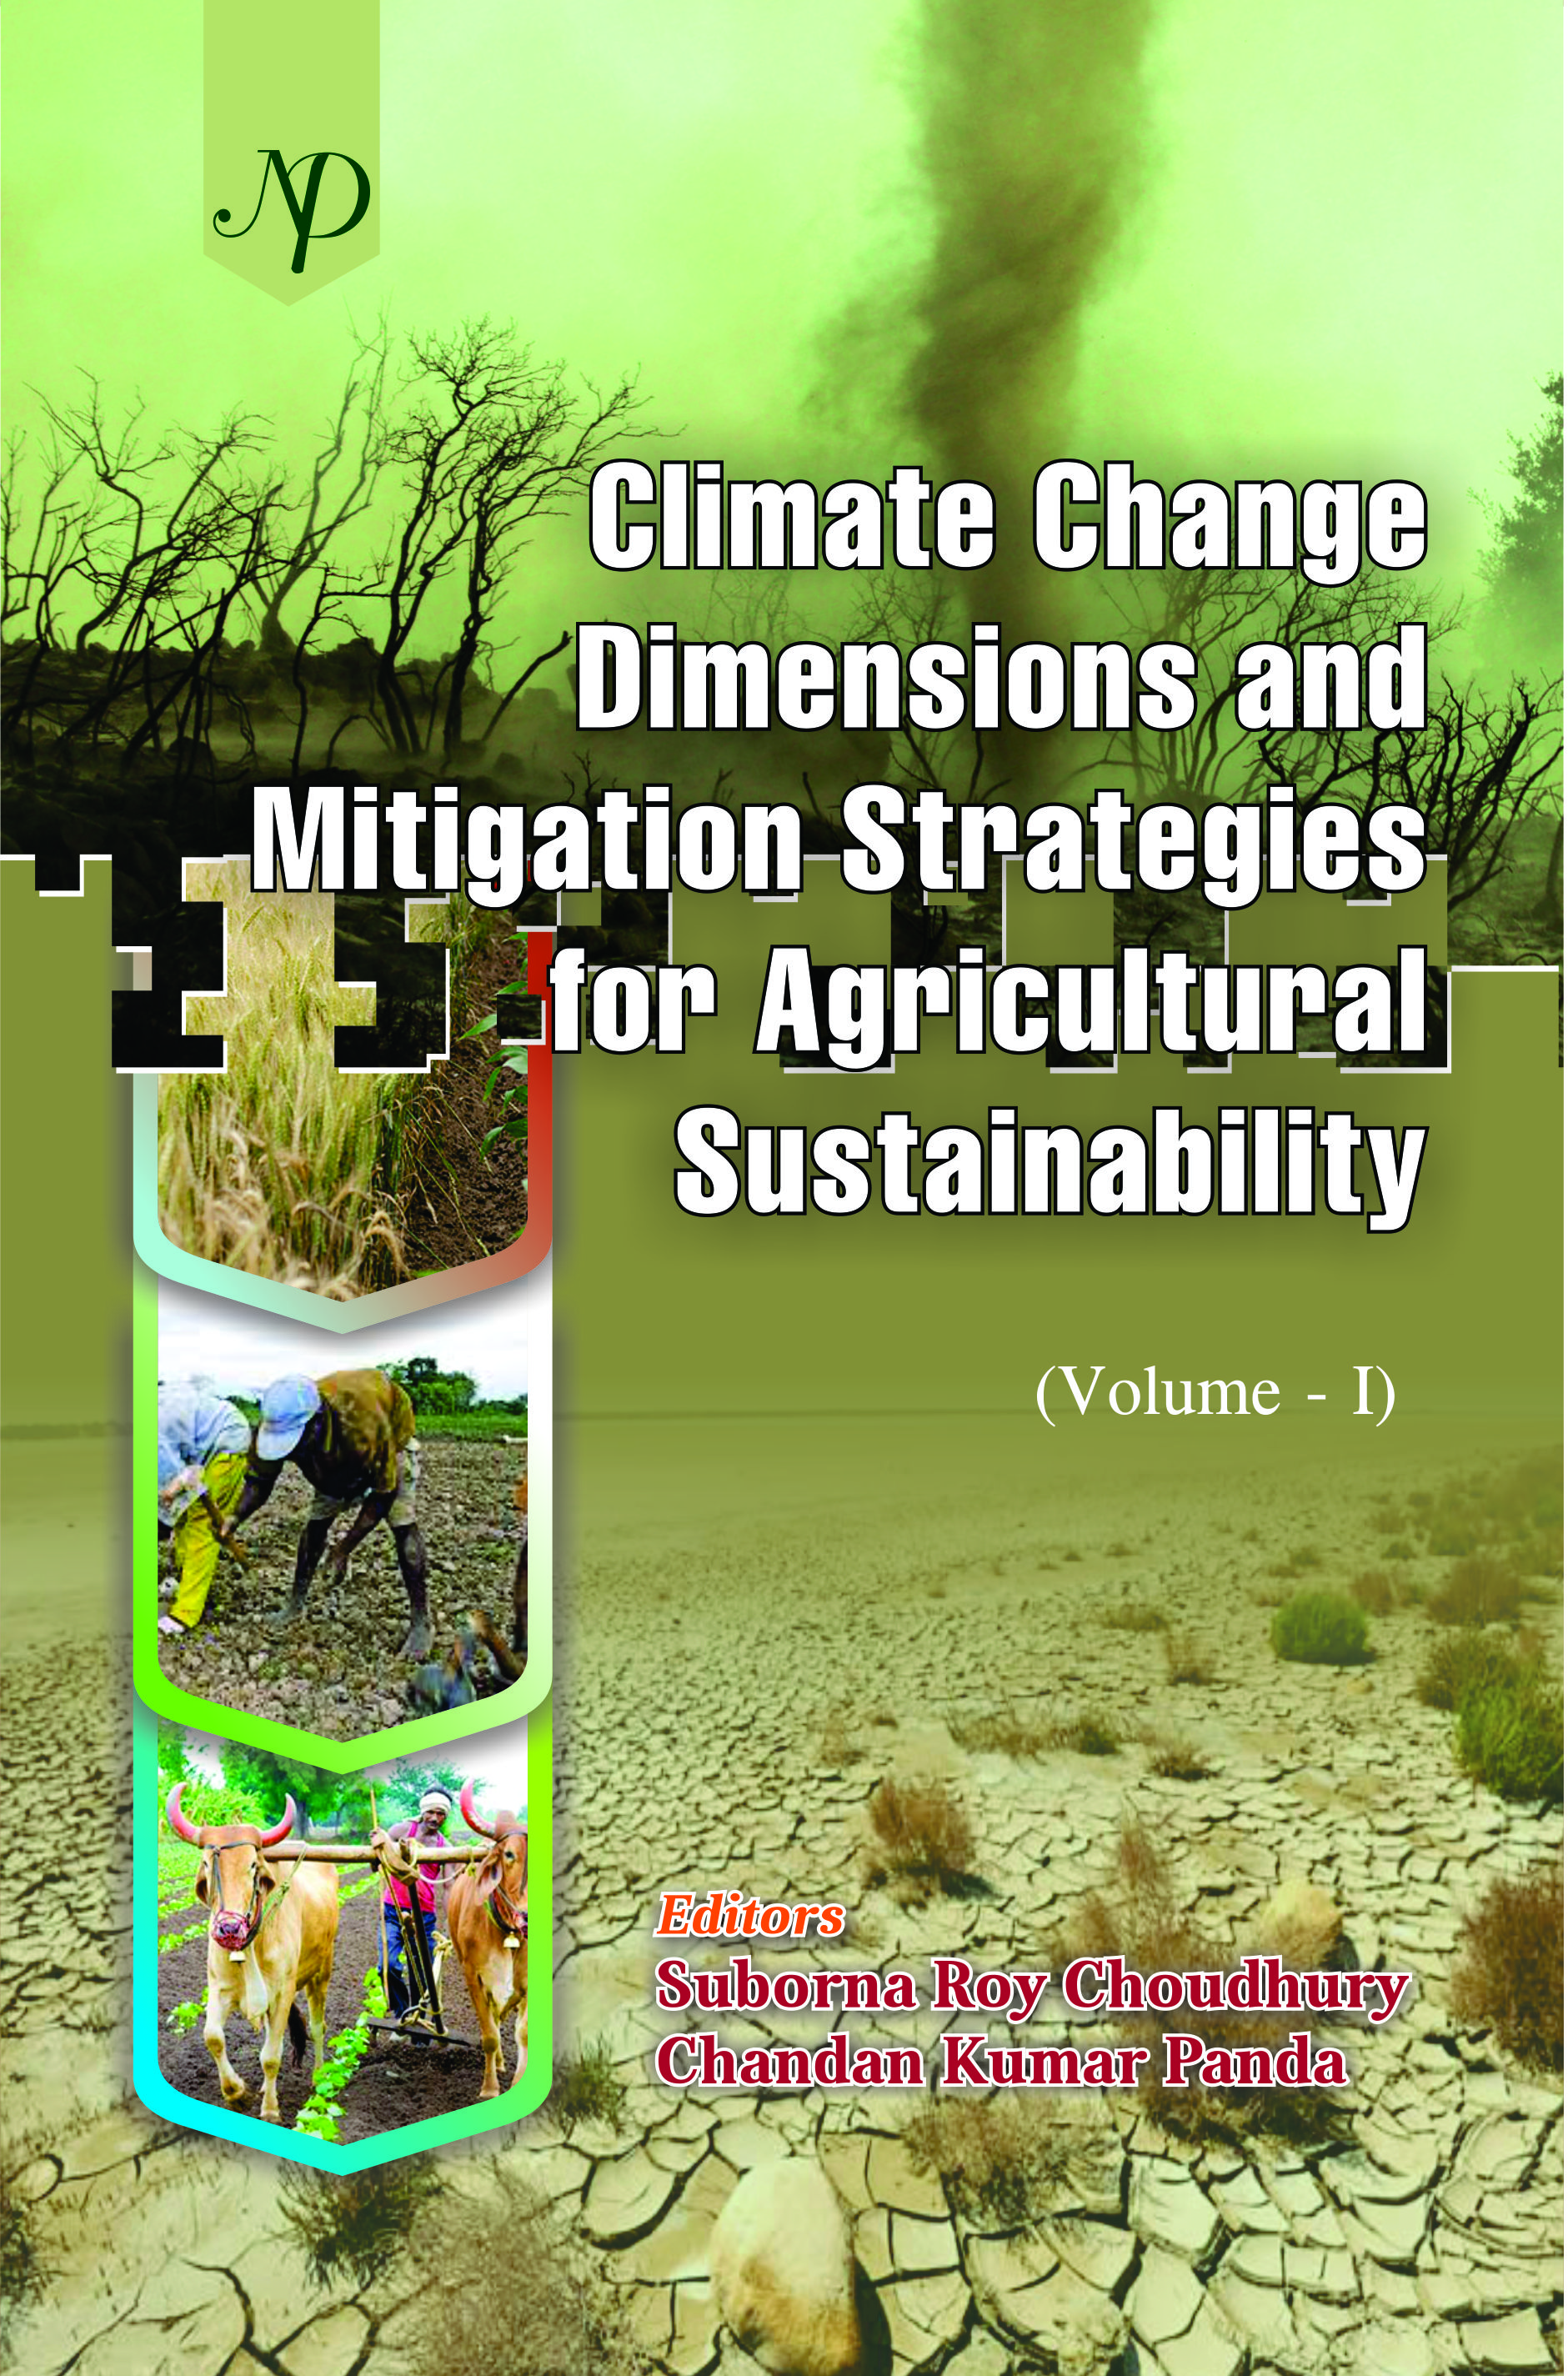 Climate Change Dimensions and Mitigation Strategies for Agricultural Sustainability Vol 1